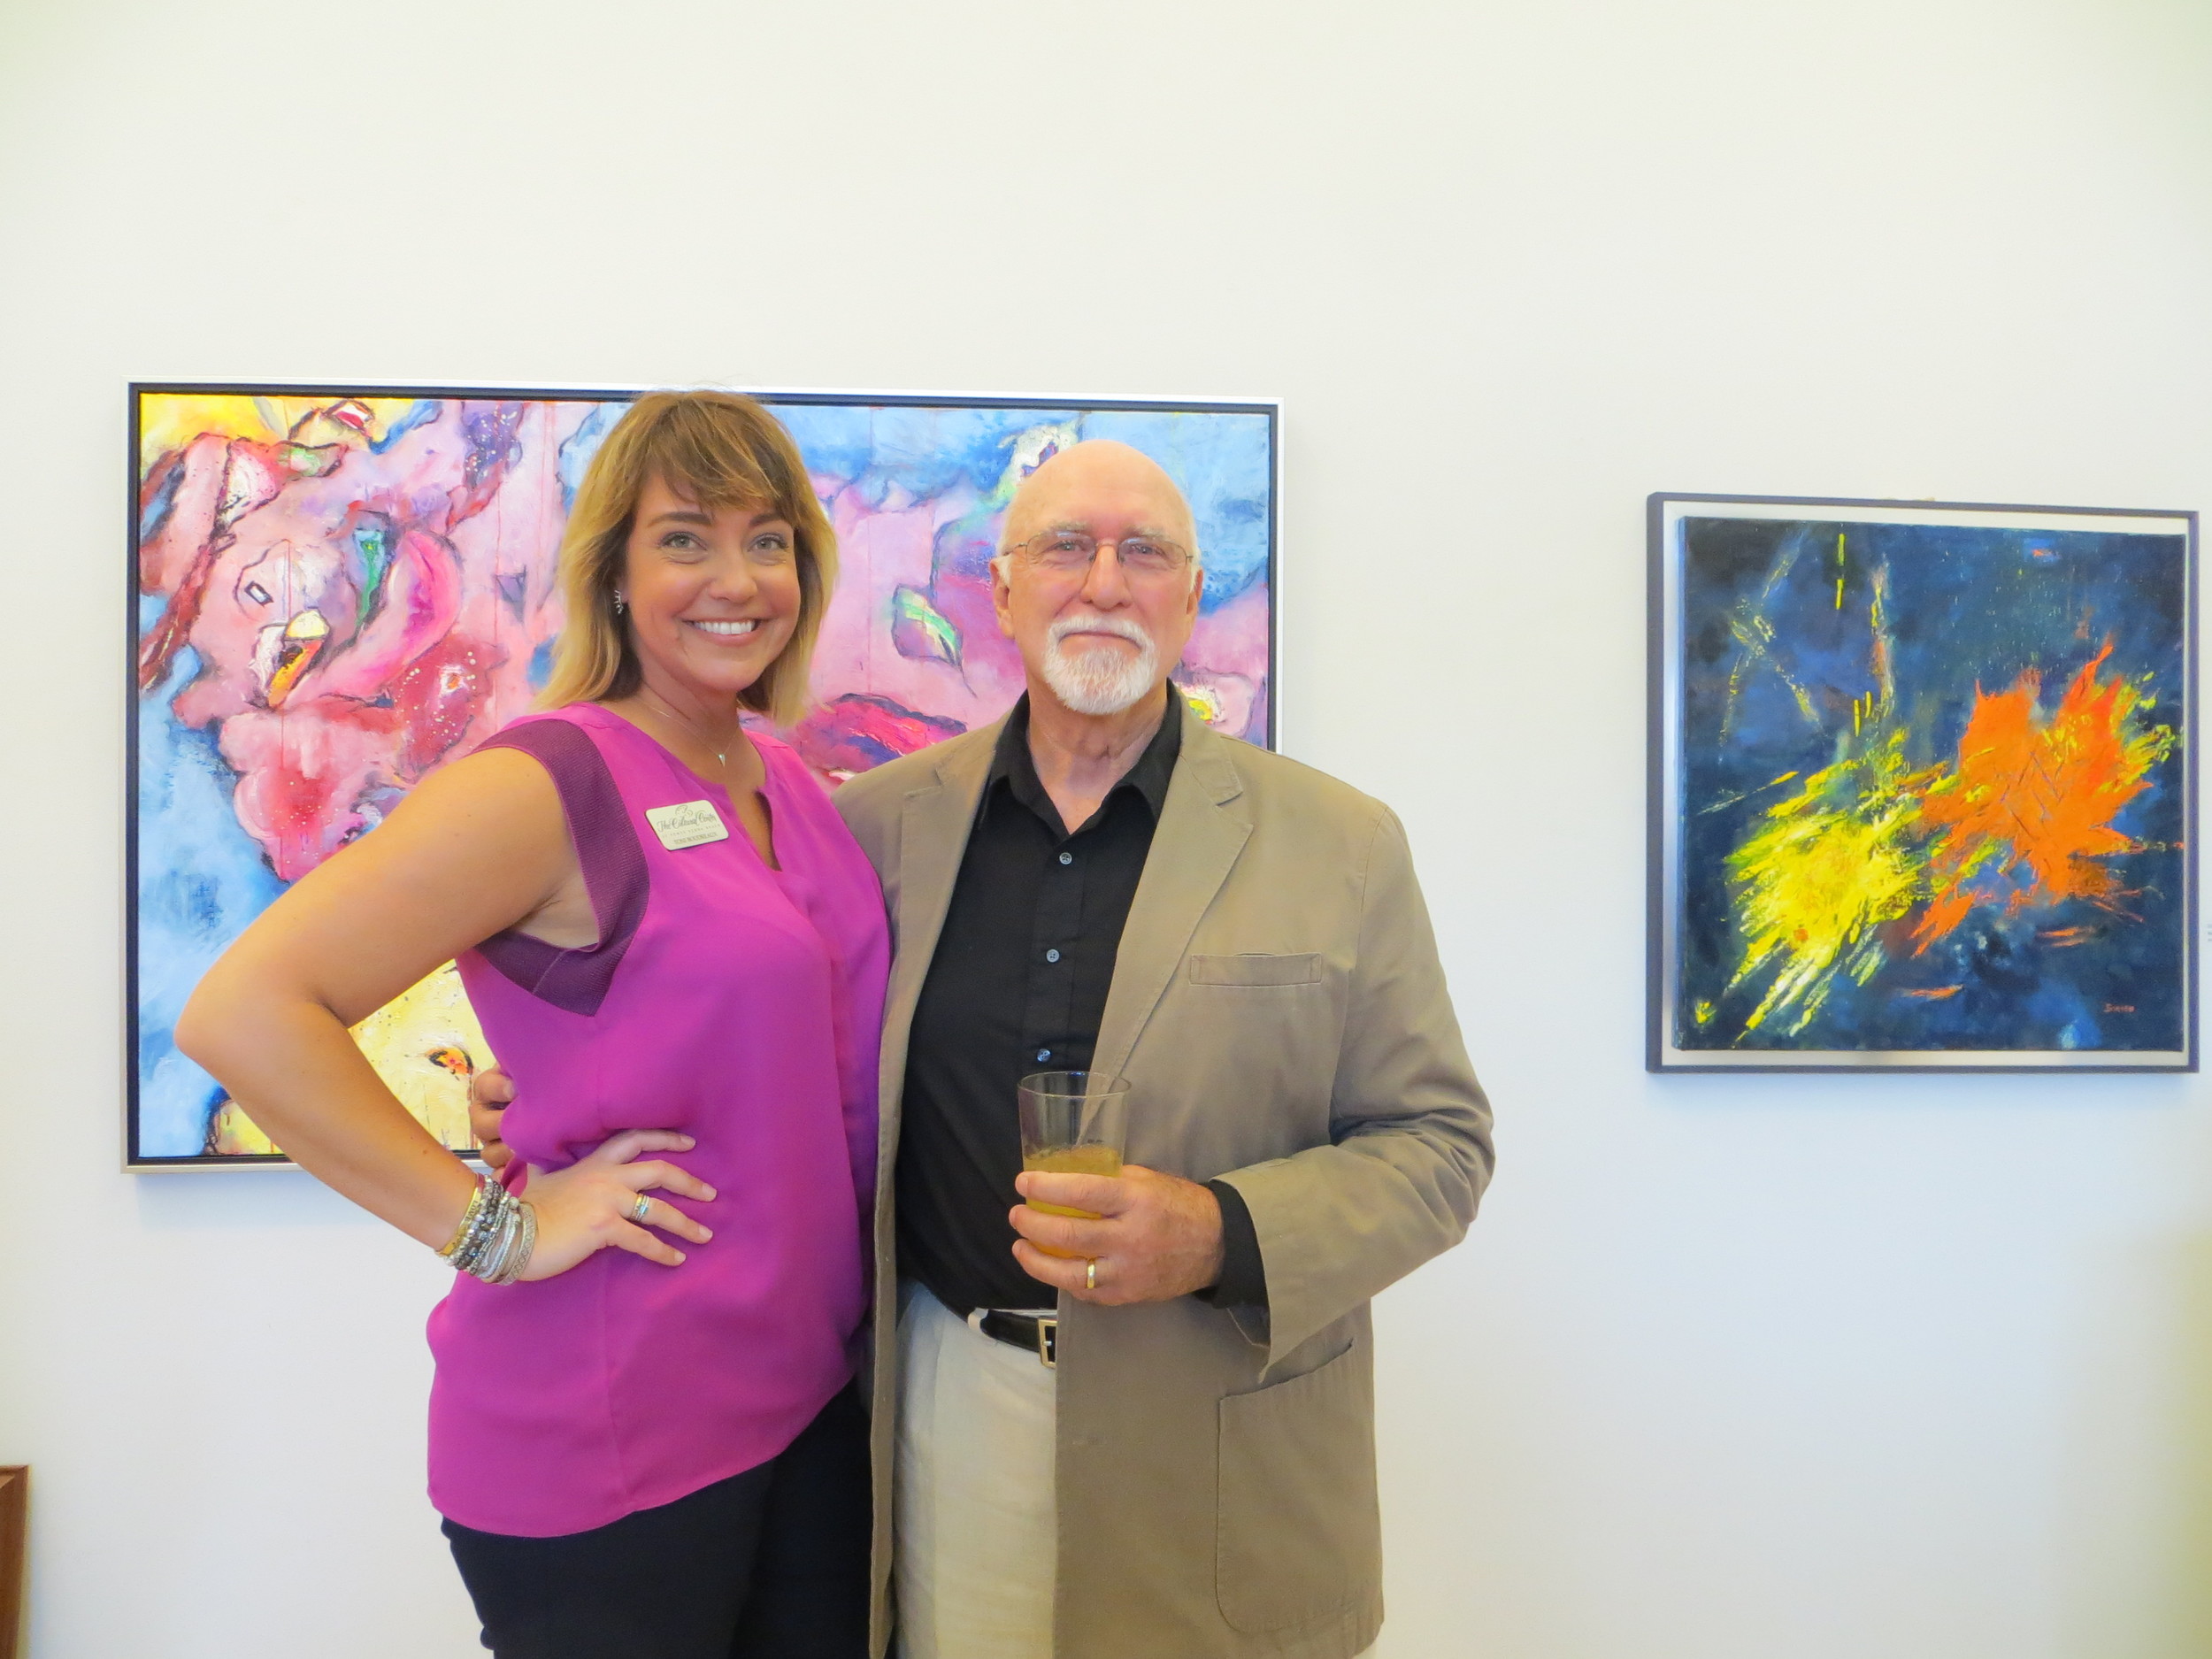 Paul Ladnier, curator of “Splashes of a Colorful Life” with Toni Boudreaux, Cultural Center at Ponte Vedra Beach development director